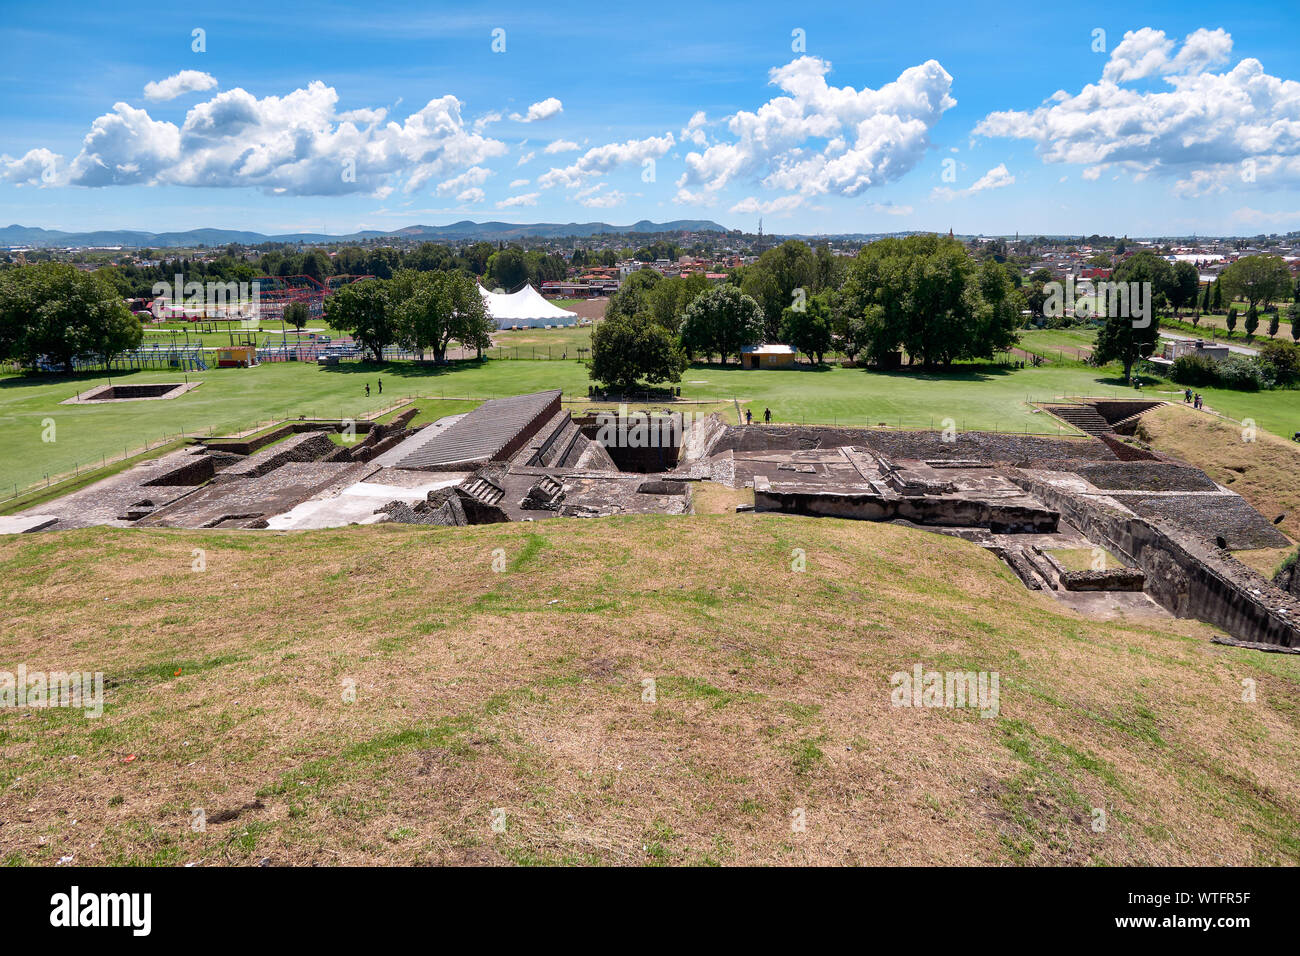 San Andres Cholula, Mexico, September 30, 2018 - High angle view of Great Pyramid of Cholula ruins with blue cloudy sky at sunny day. Stock Photo